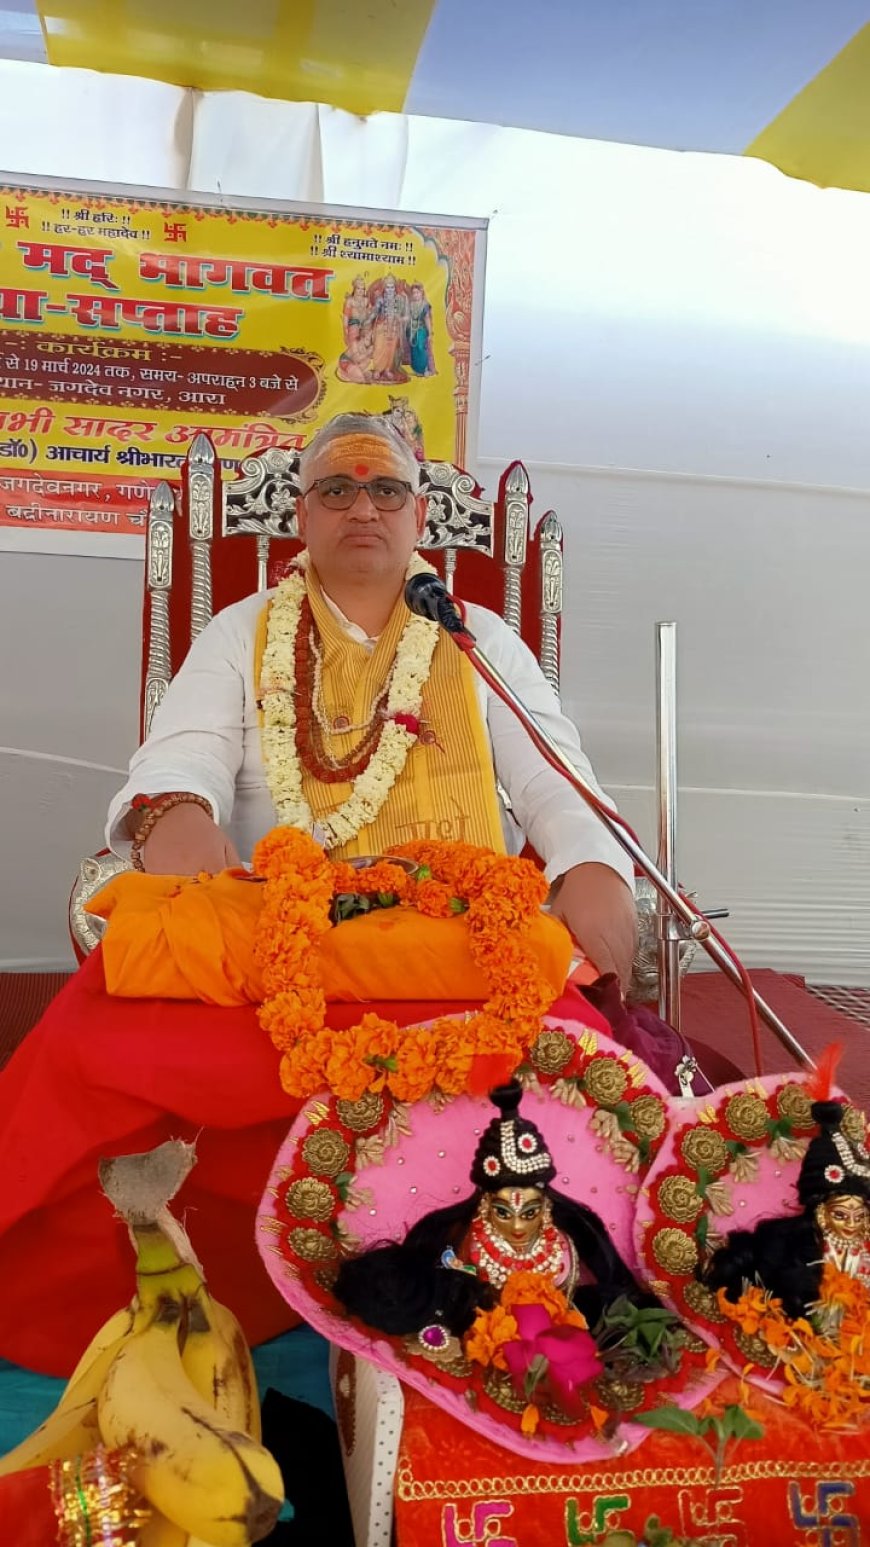 CELIBACY IS THE GREAT MANTRA OF SUCCESS IN LIFE—ACHARYA BHARAT BHUSHAN PANDEY